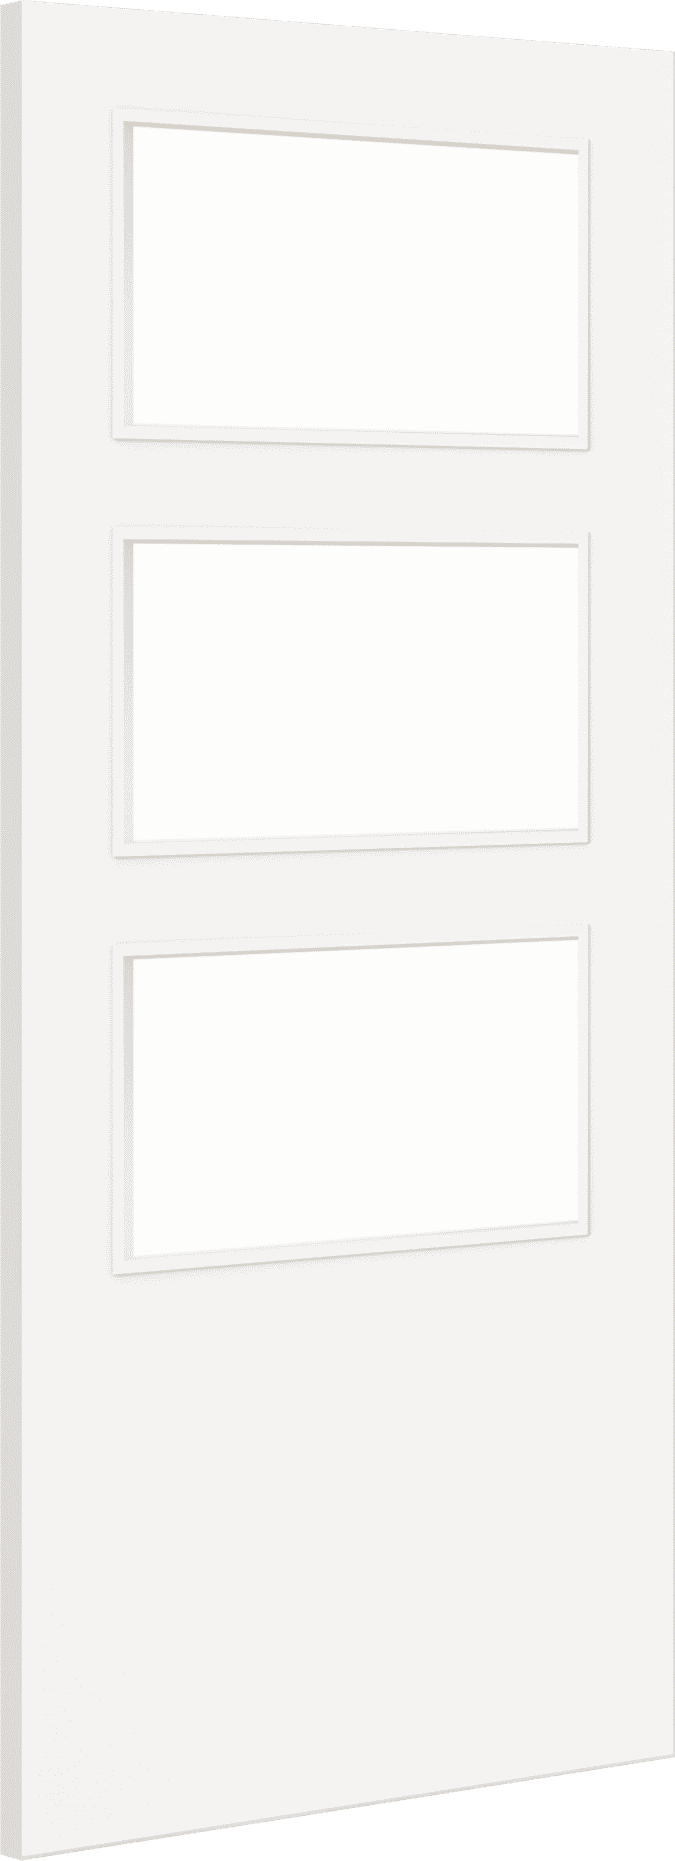 1981mm x 914mm x 44mm (36") Architectural Paint Grade White 03 Clear Glazed Fire Door Blank